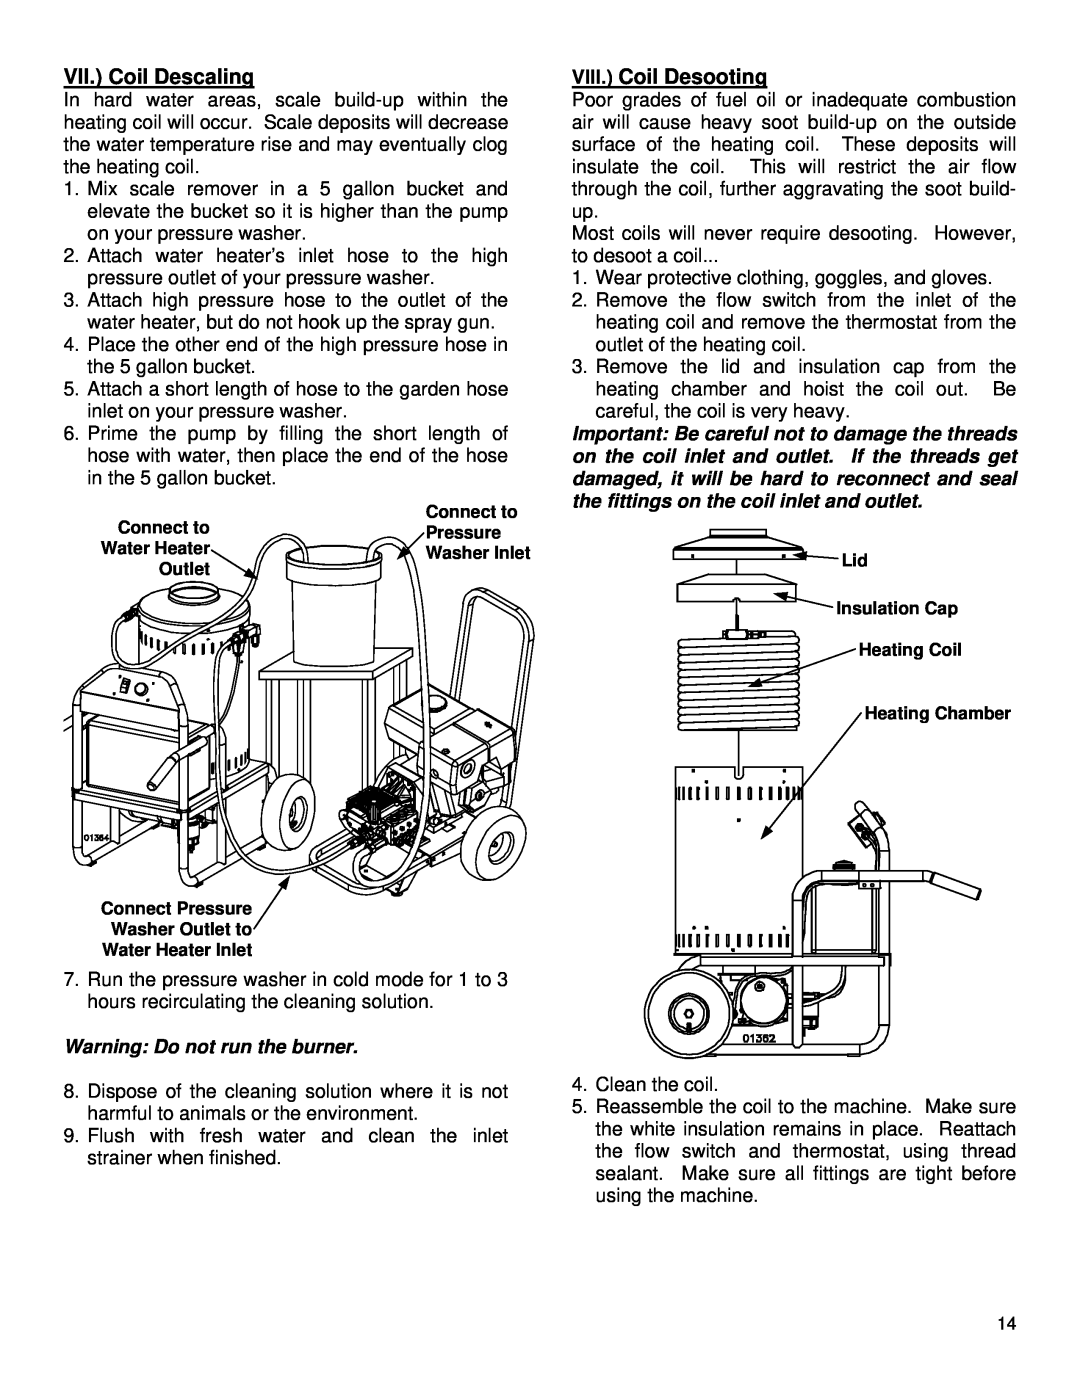 Northern Industrial Tools 157494 specifications VII. Coil Descaling, VIII. Coil Desooting, Warning Do not run the burner 